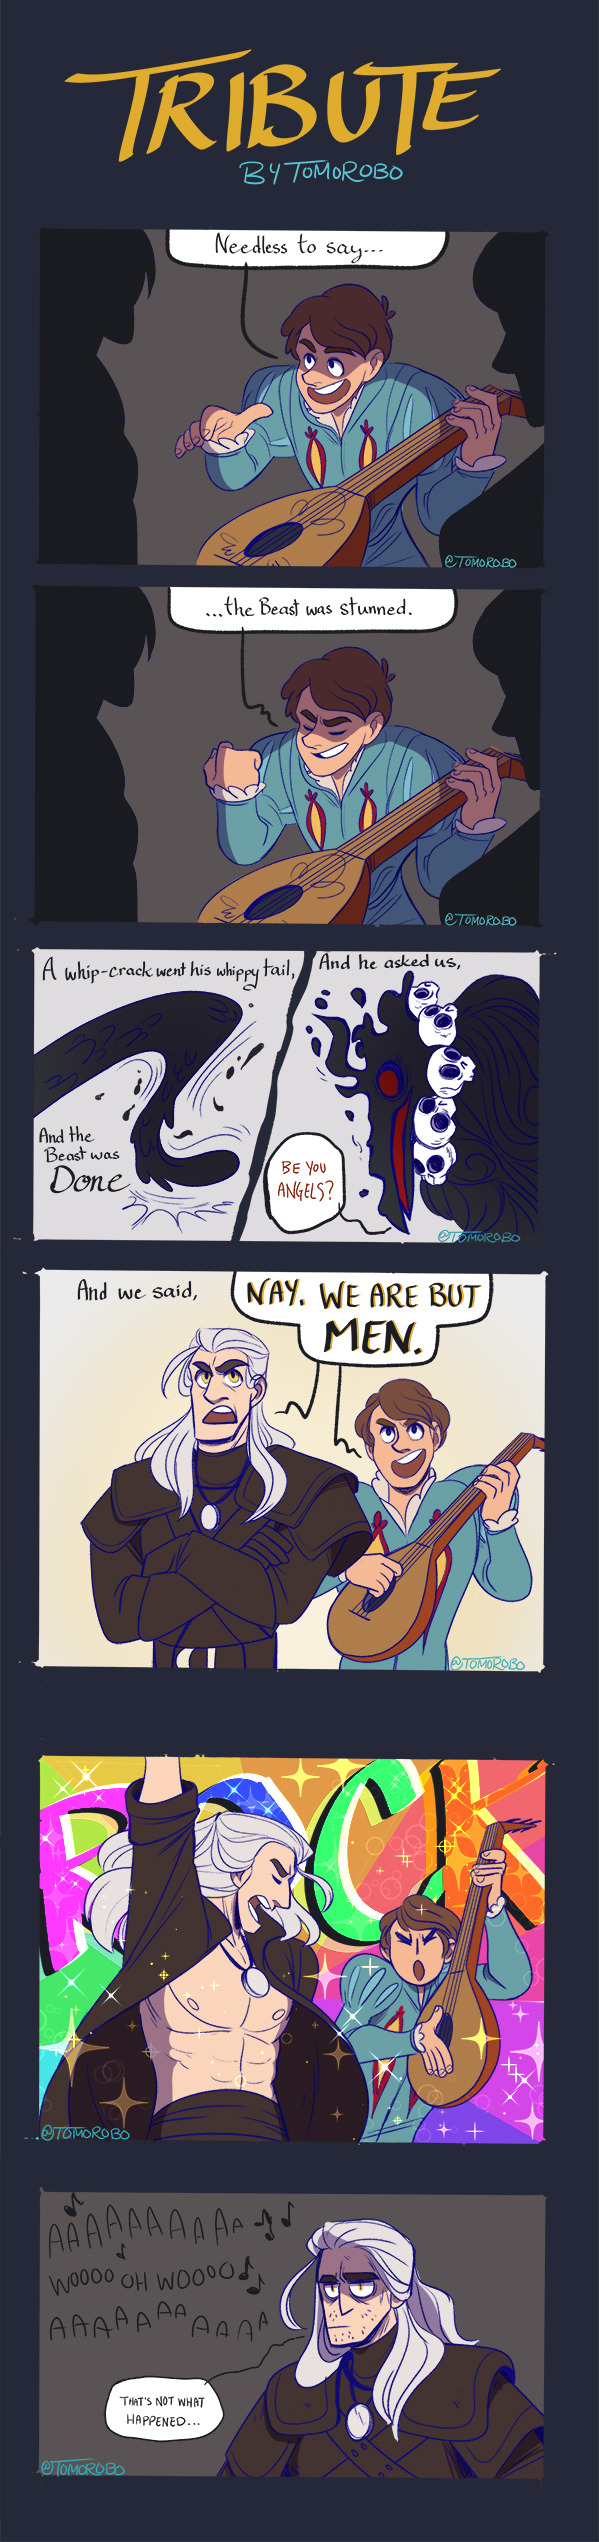 The Witcher According to Dandelion Comic